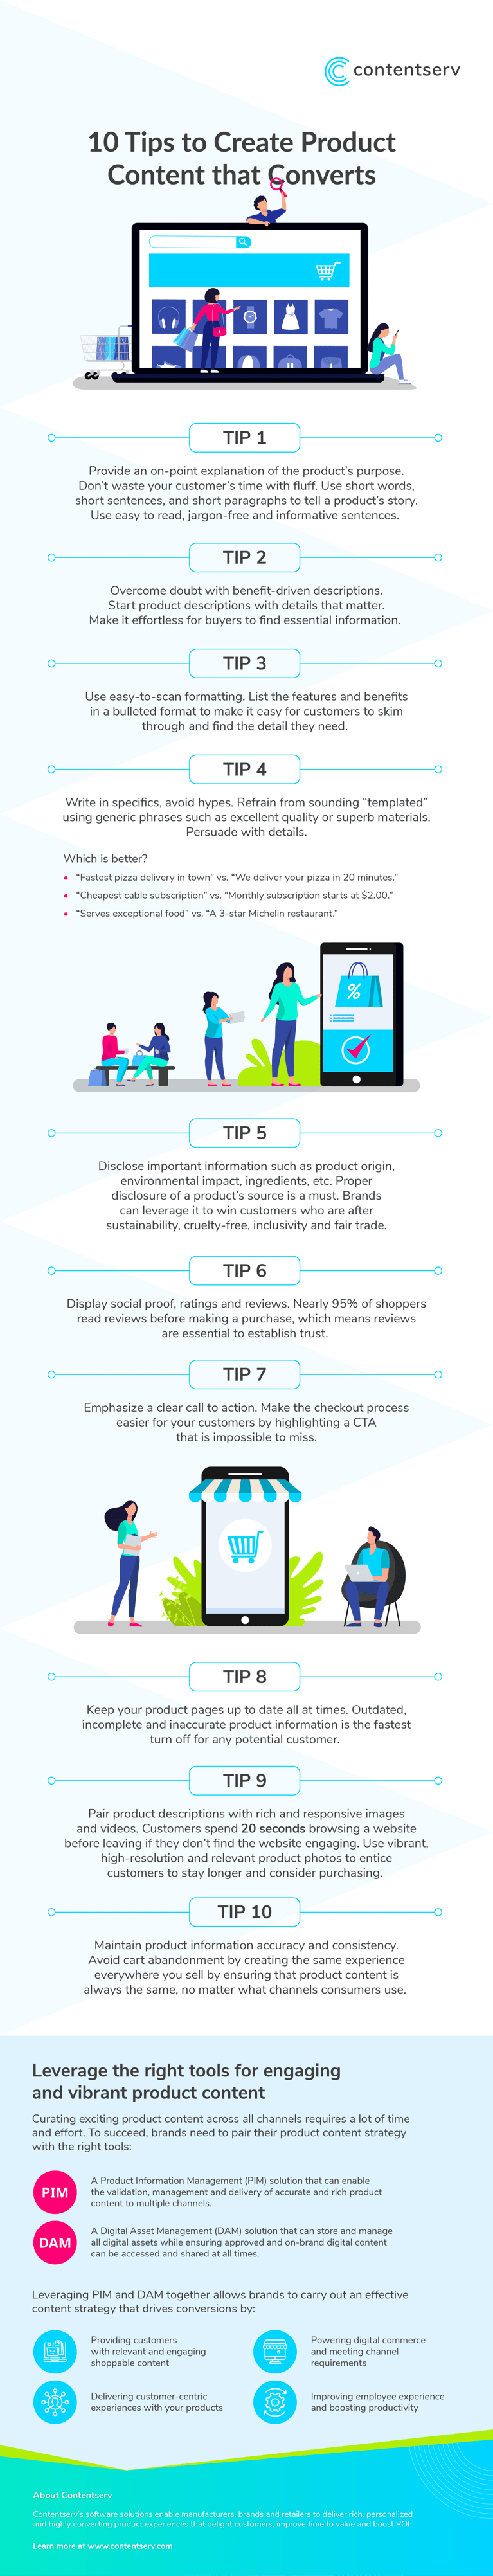 Infografic: 10 Tips to Create Product Content that Converts